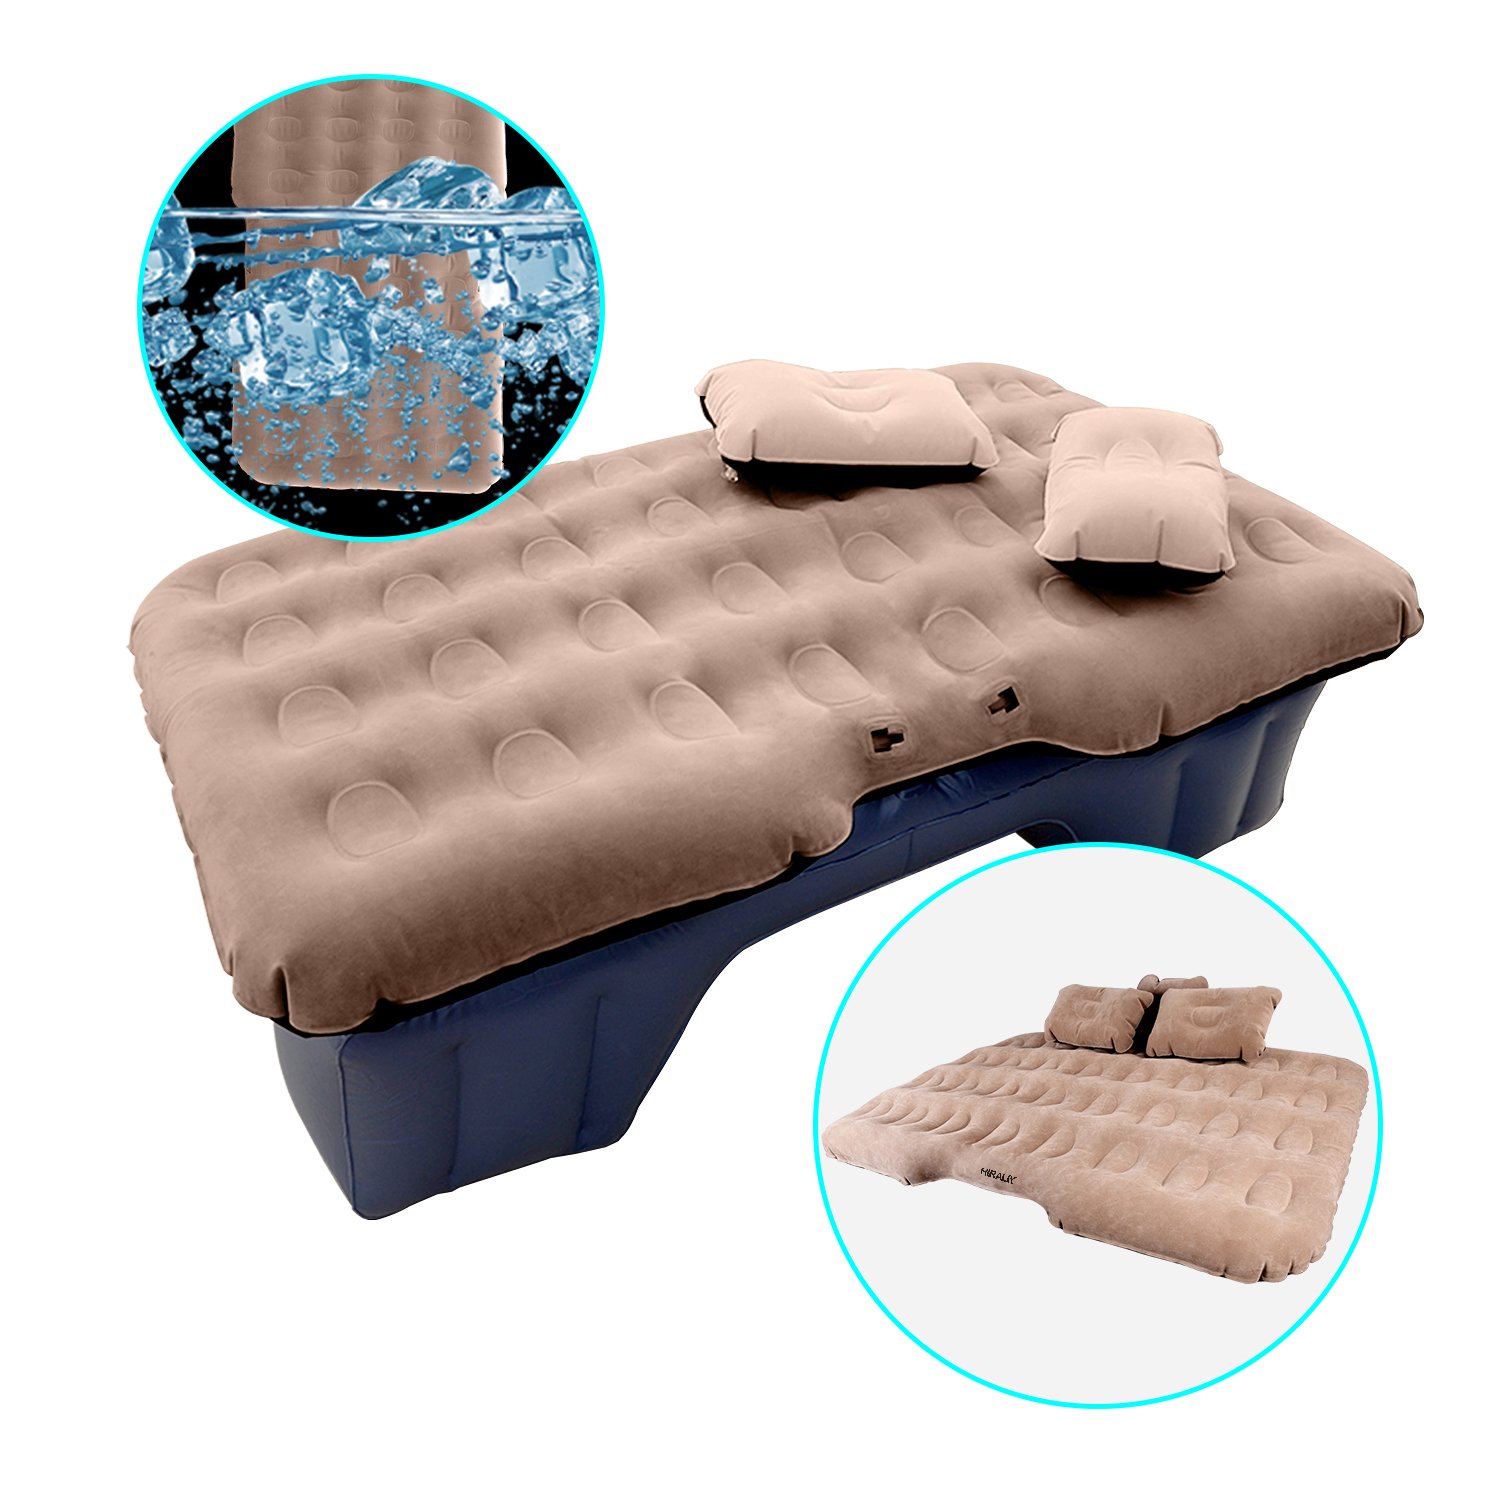 HIRALIY Car Inflatable Mattress Portable Travel Camping Air Bed Foldable Couch with Electric Pump